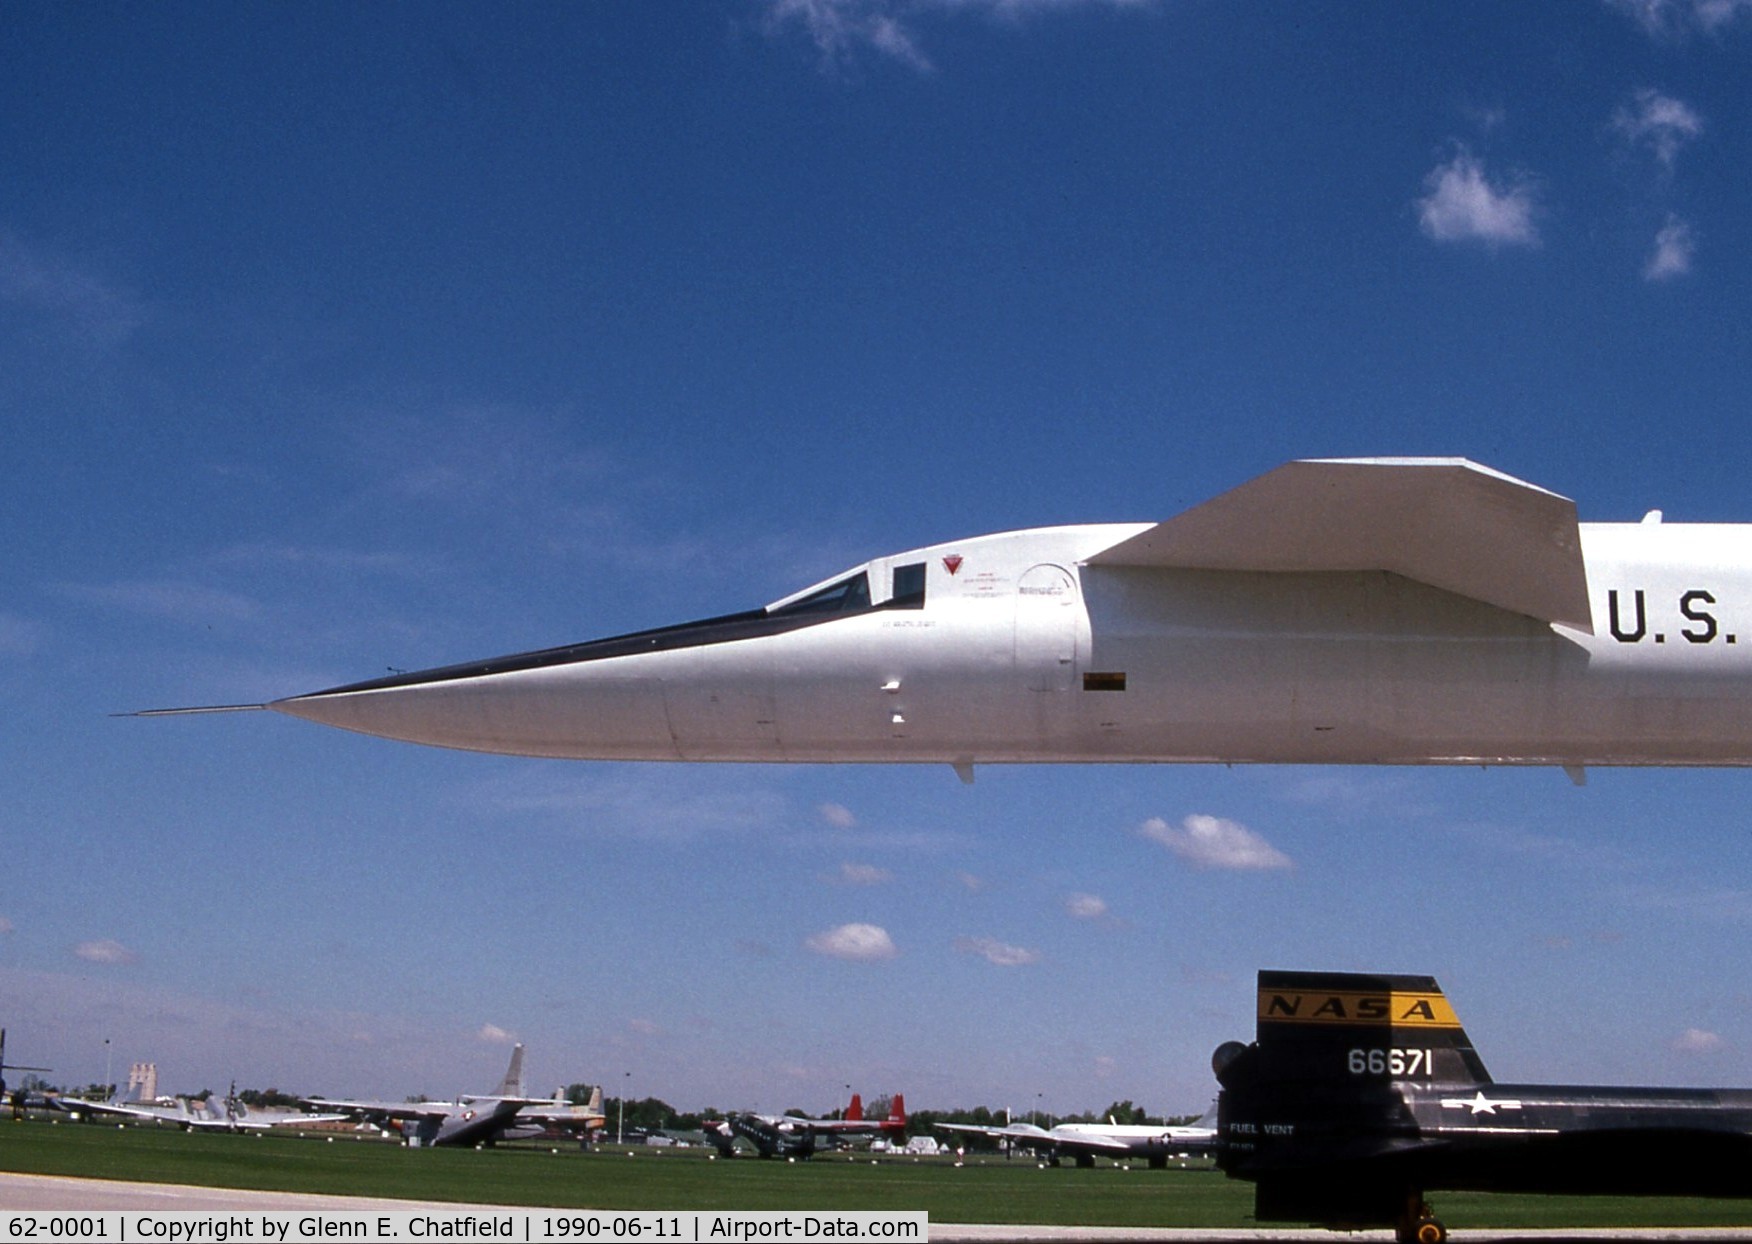 62-0001, 1964 North American XB-70A Valkyrie C/N 278-1, XB-70 at the Air Force Museum